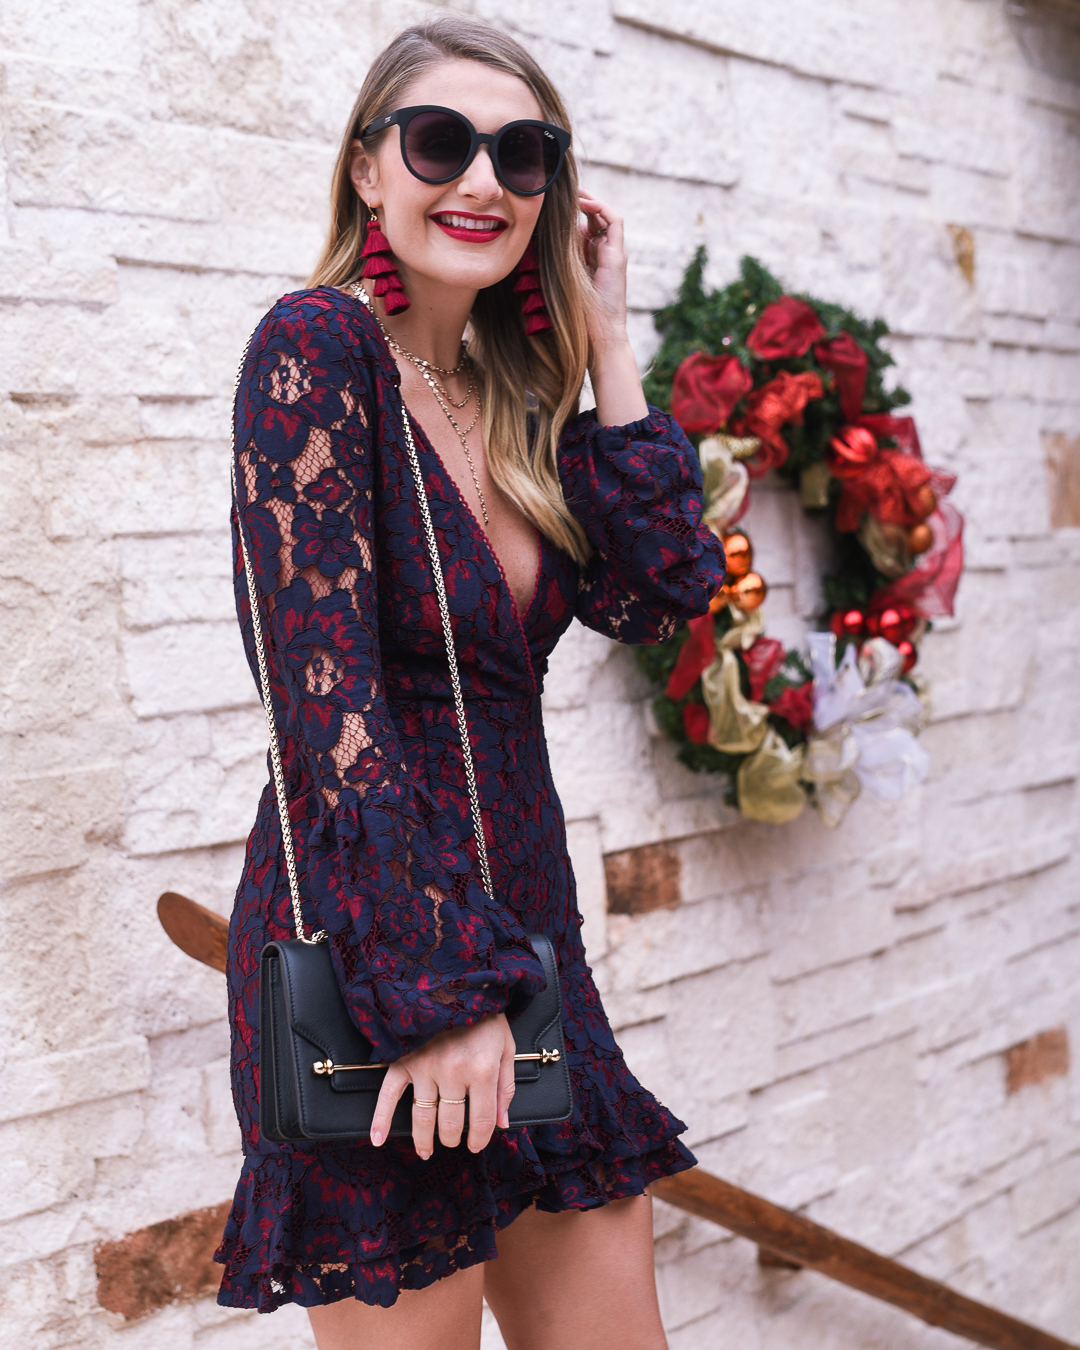 holiday outfit for christmas and new year's eve - Lace Holiday Outfit by Chicago fashion blogger Visions of Vogue